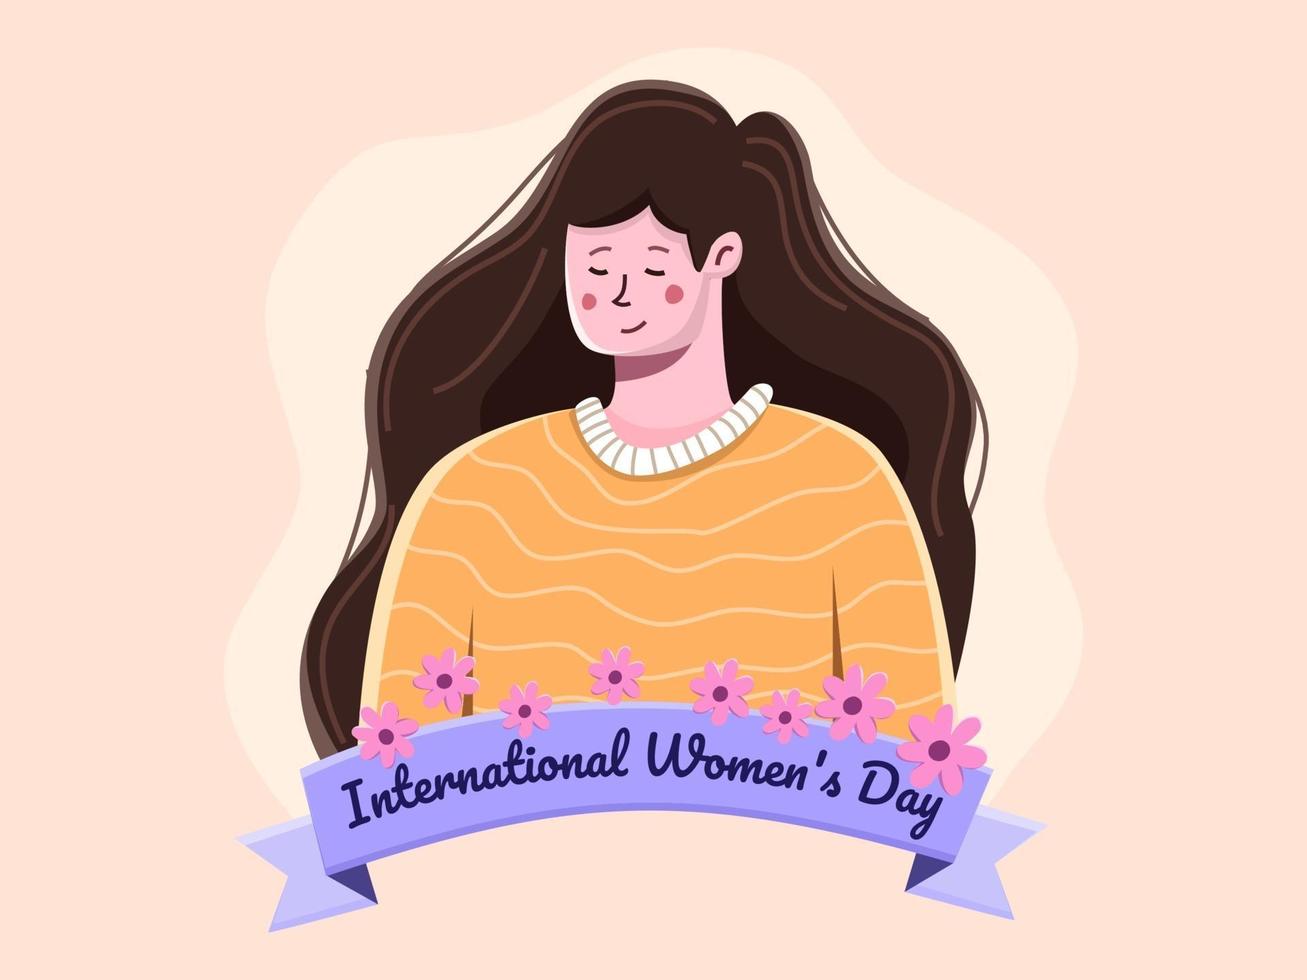 8 March International Women's Day illustration with cute woman. Greeting Happy International Woman day. Women's Day 2021 campaign theme ChooseToChallenge. Can be used for banner, poster, postcard. vector